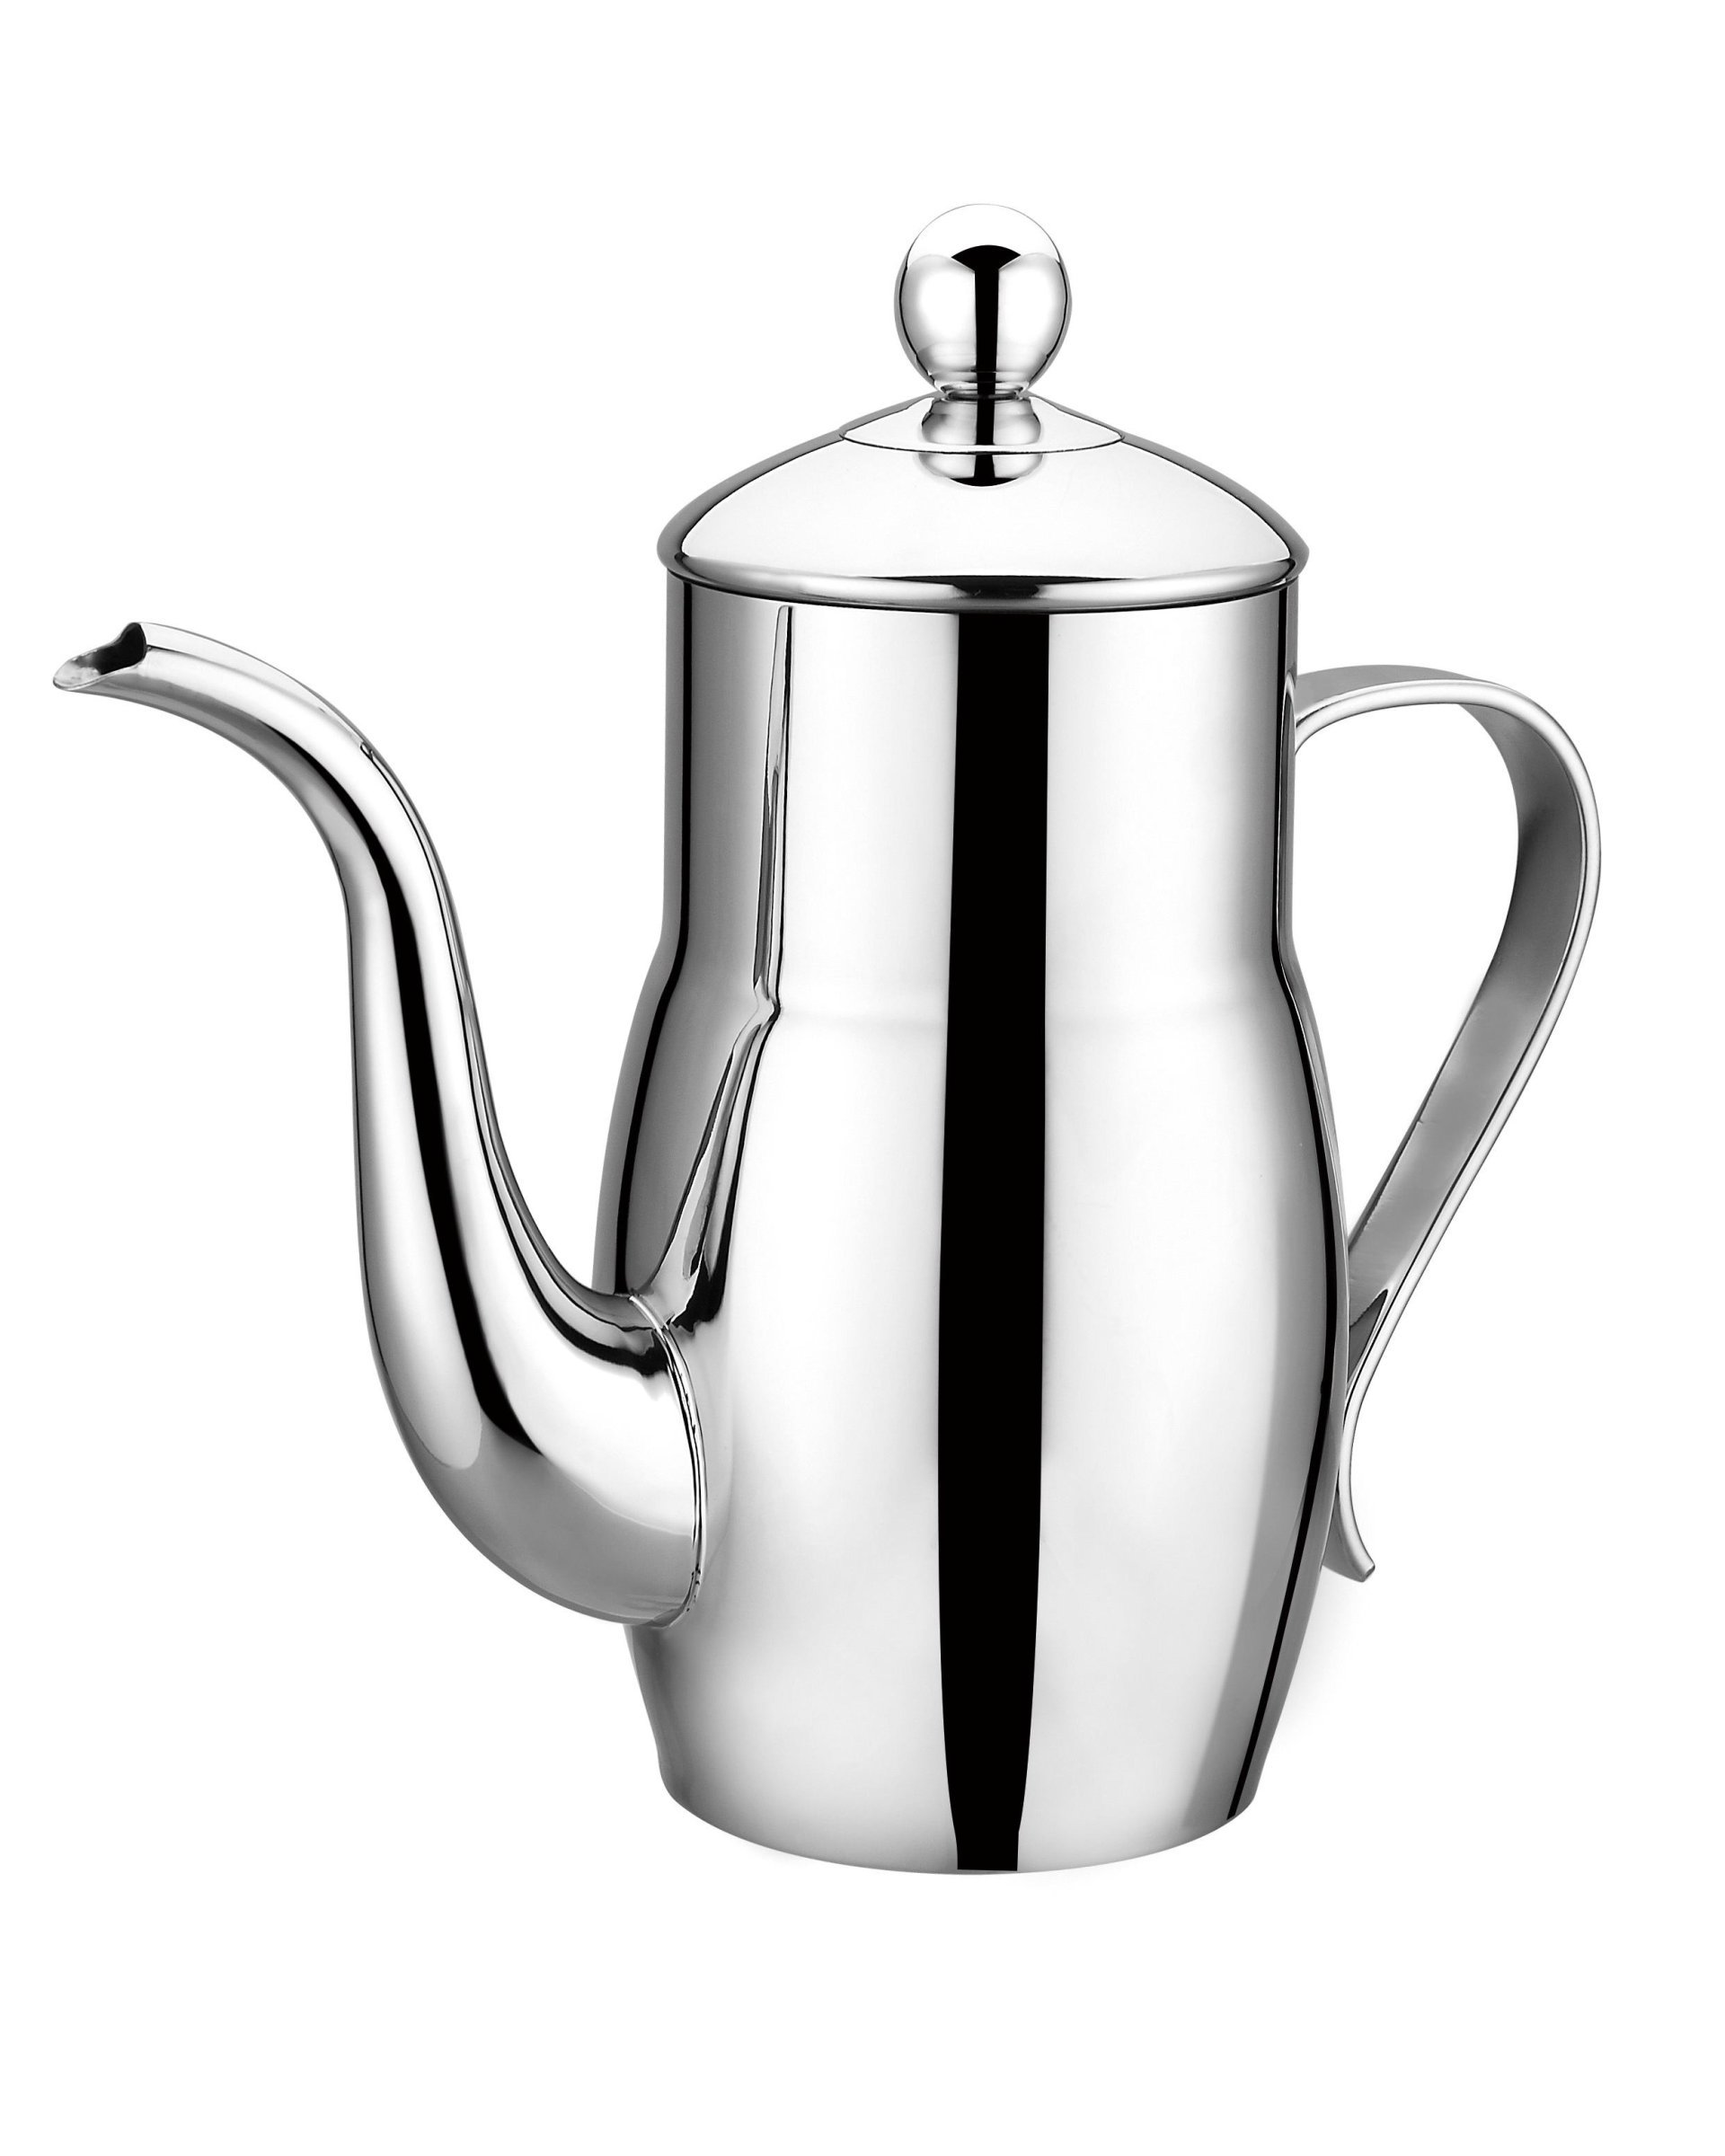 01 cold water kettle (12L)